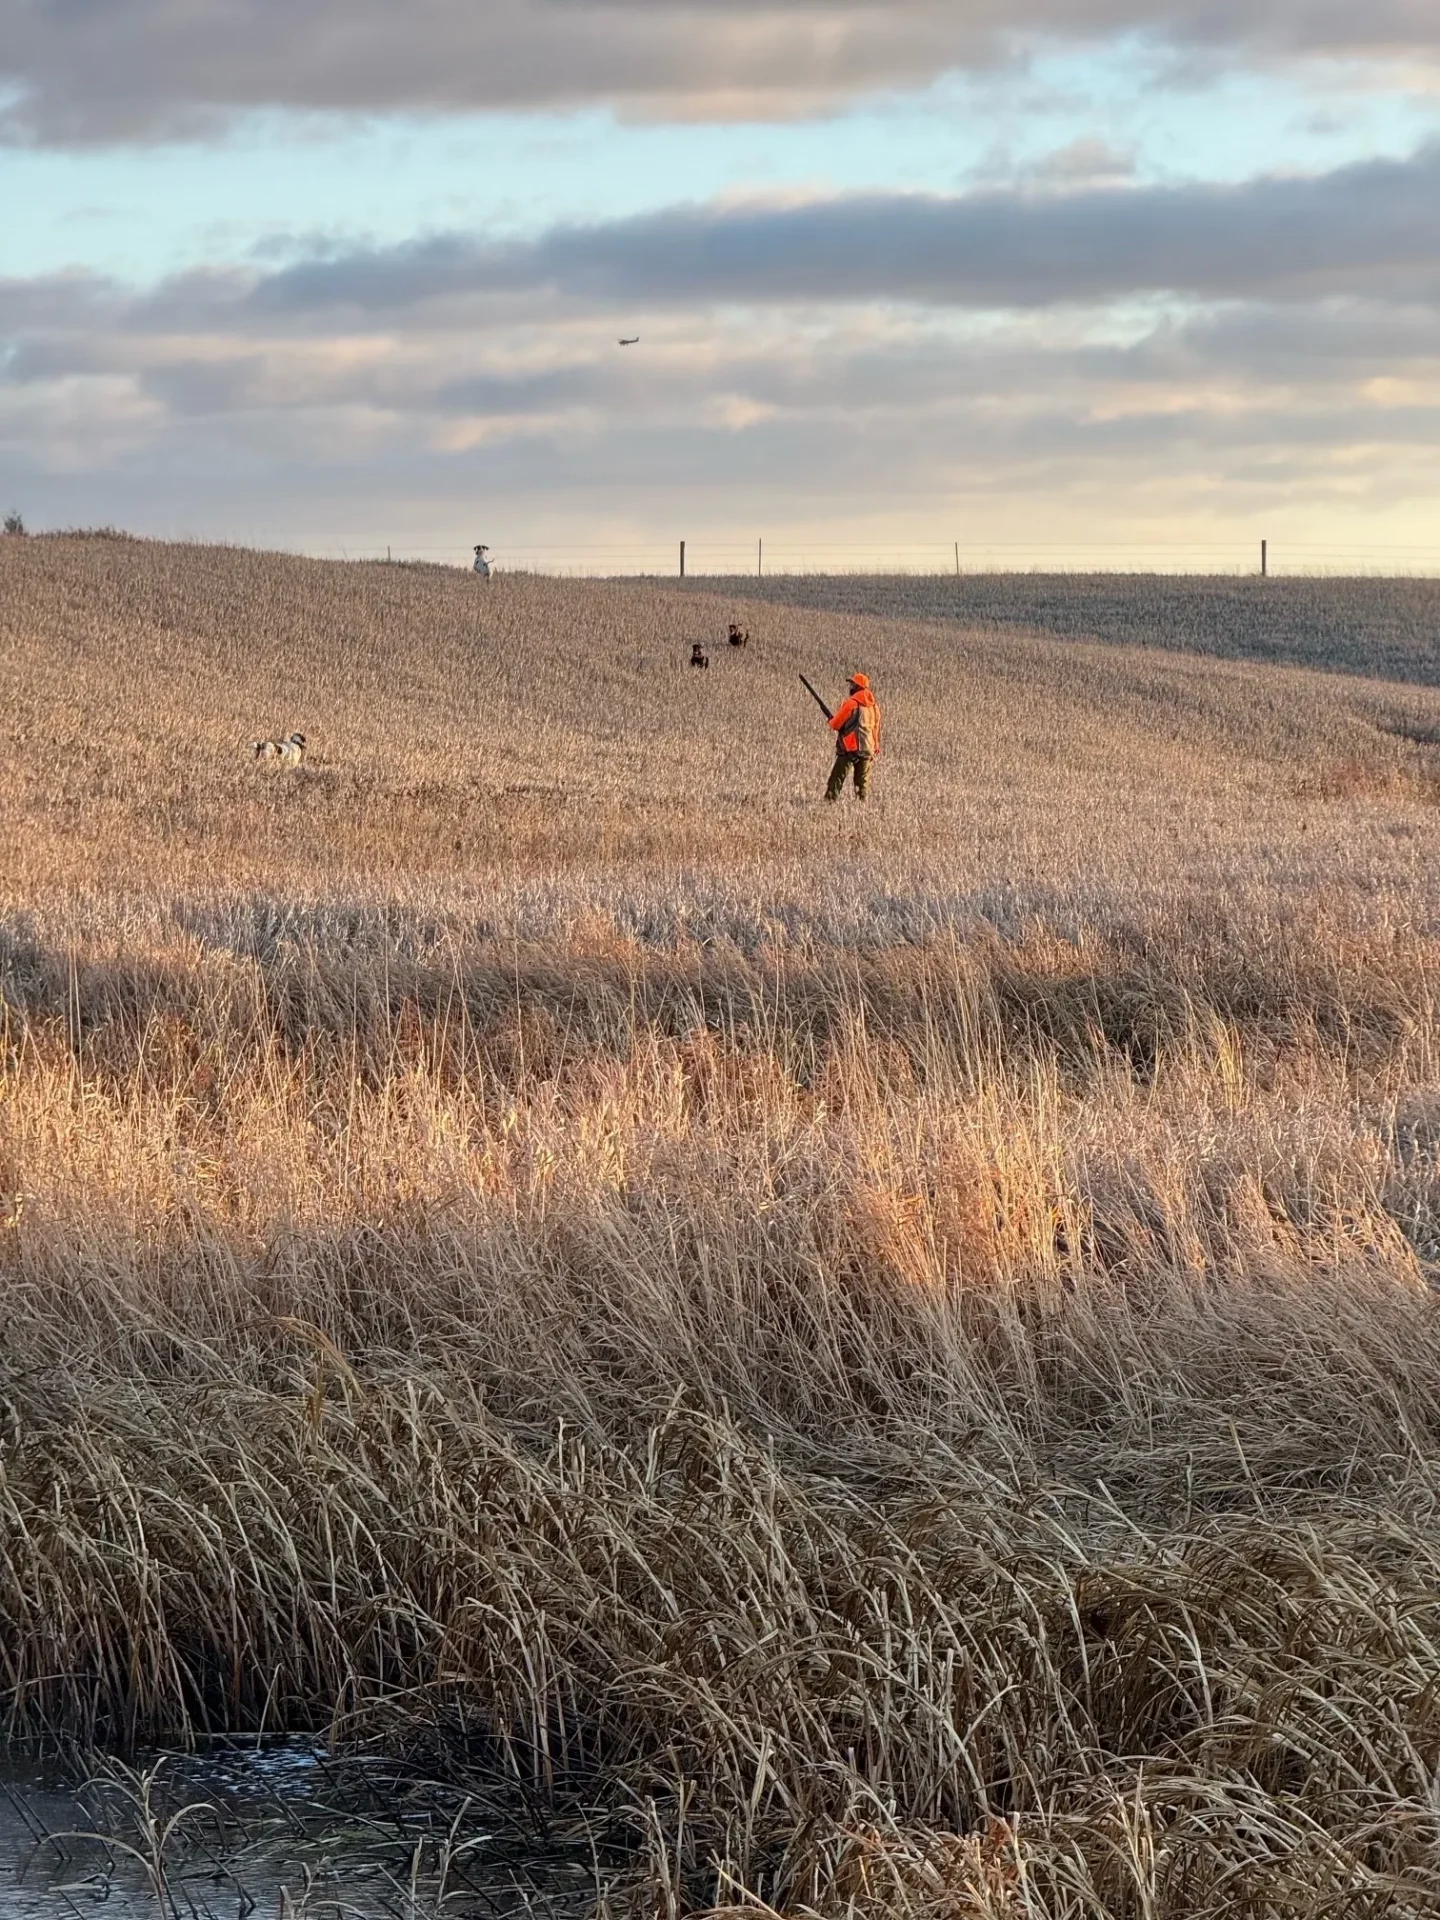 A person in an orange jacket standing on top of a field.